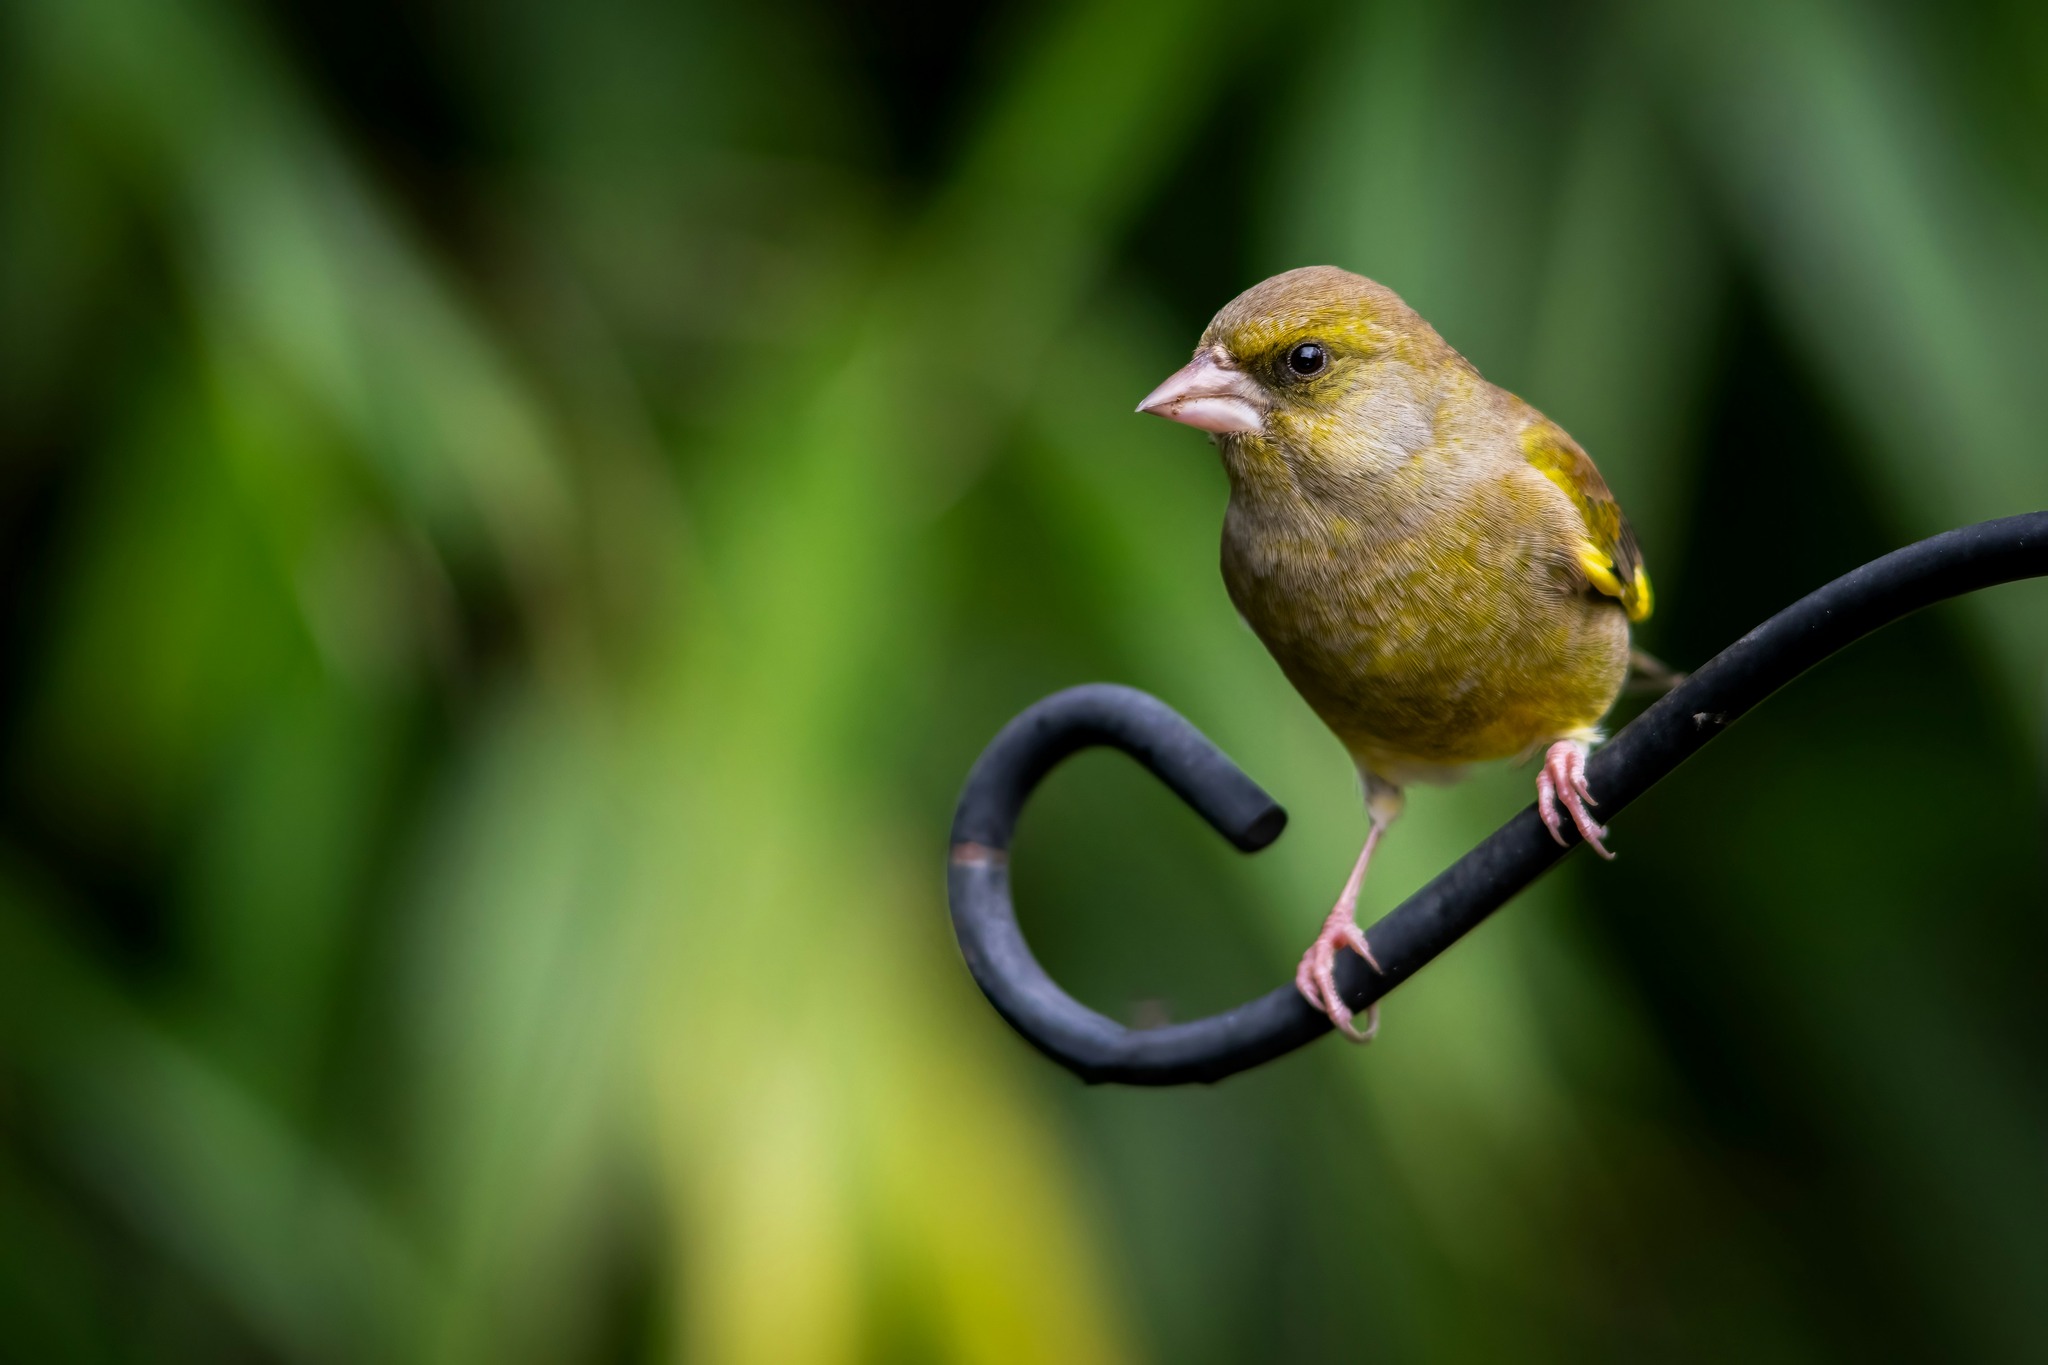 Greenfinch perched on a piece of metal.